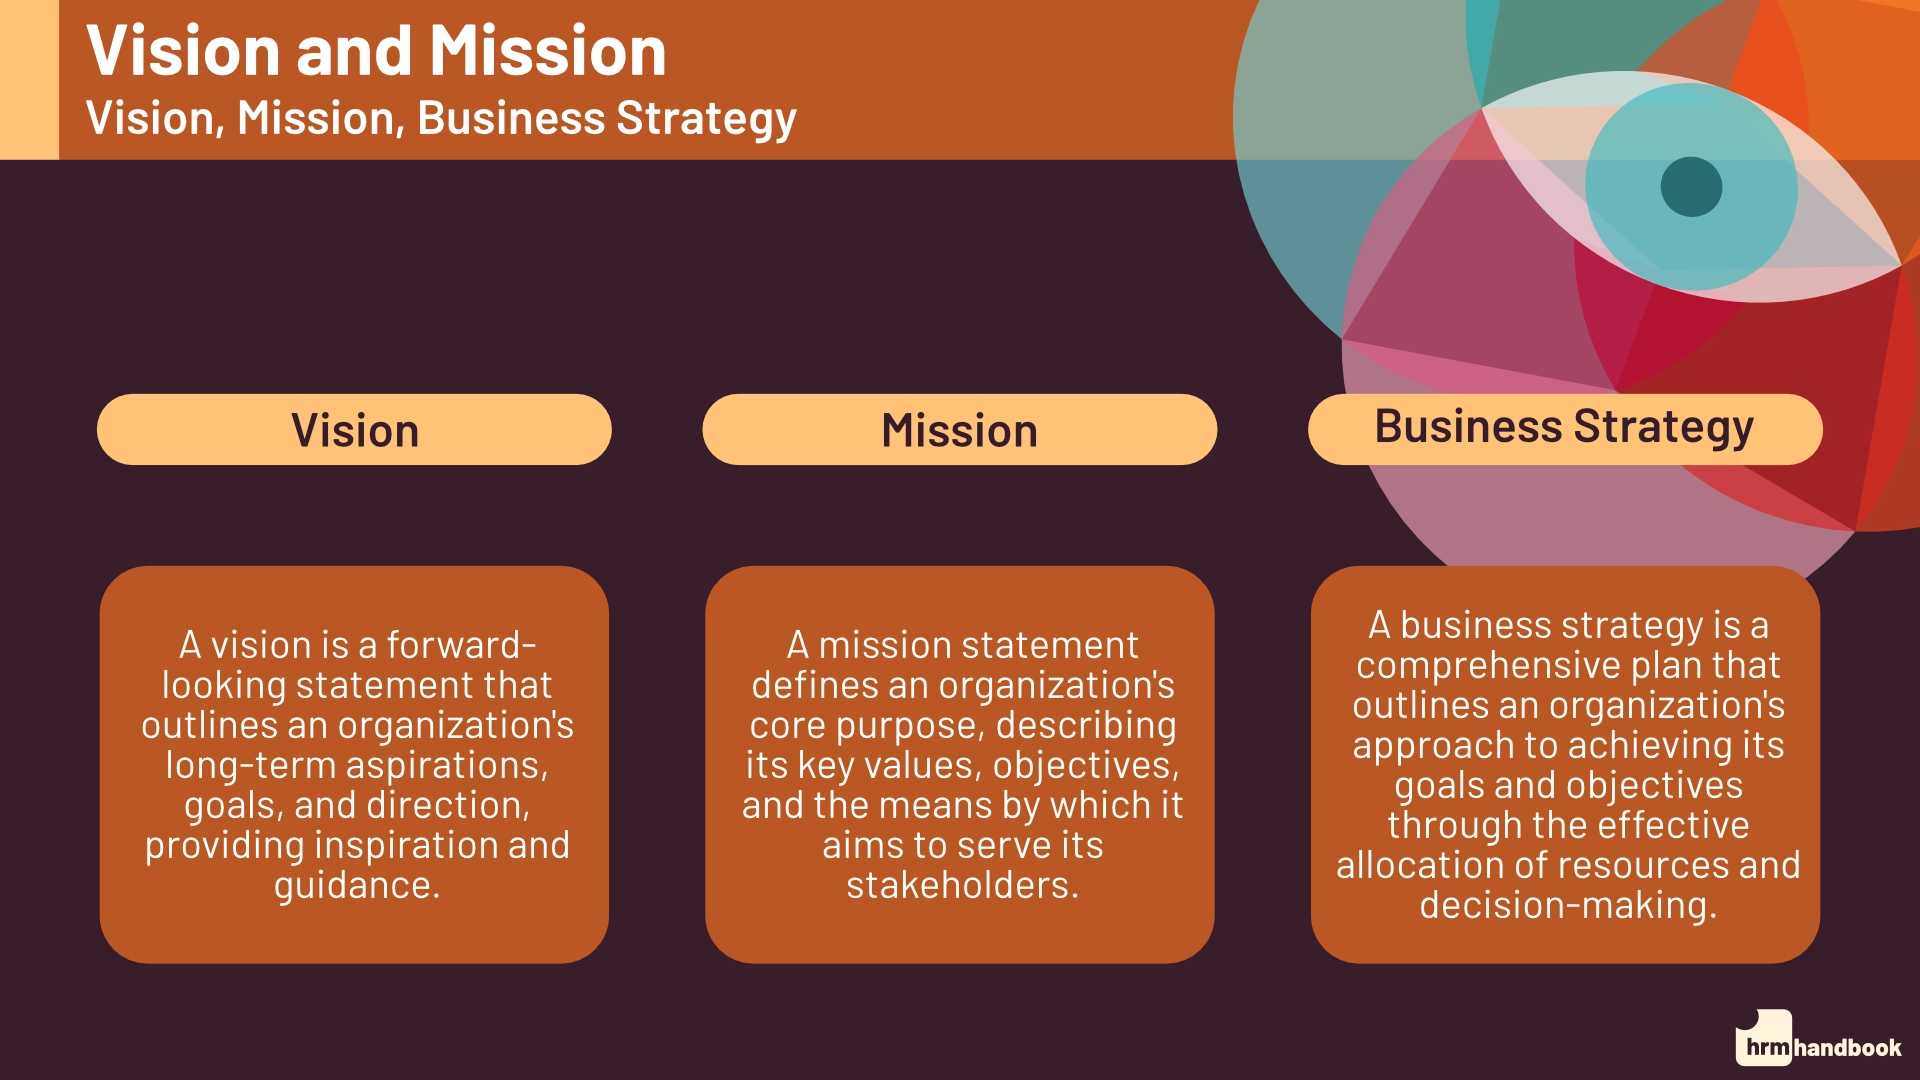 Vision, Mission and Business Strategy